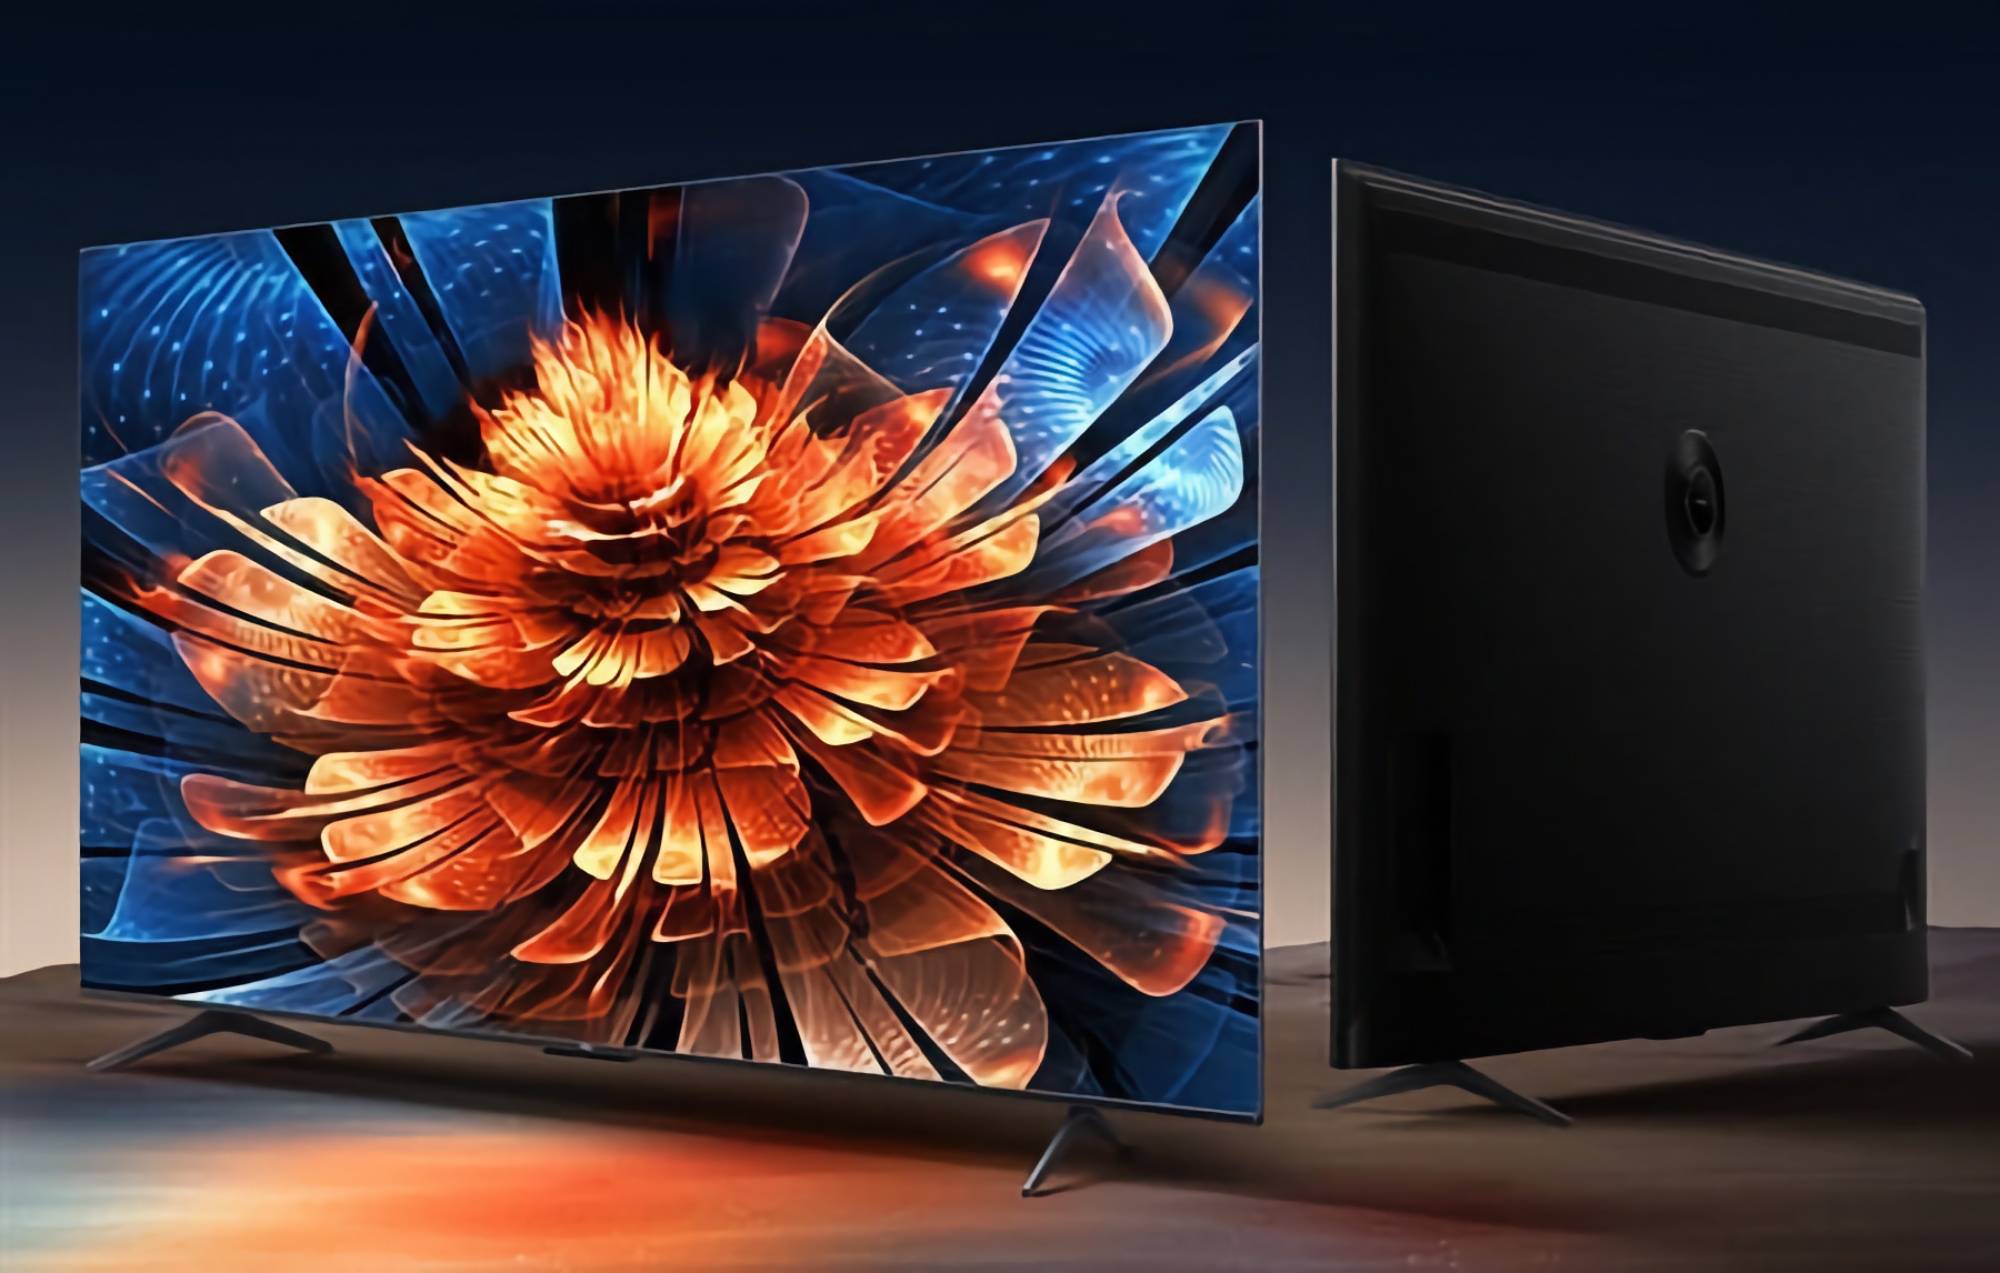 TCL Q9K Mini LED TV: a range of smart TVs with screens up to 98 inches and prices from $625